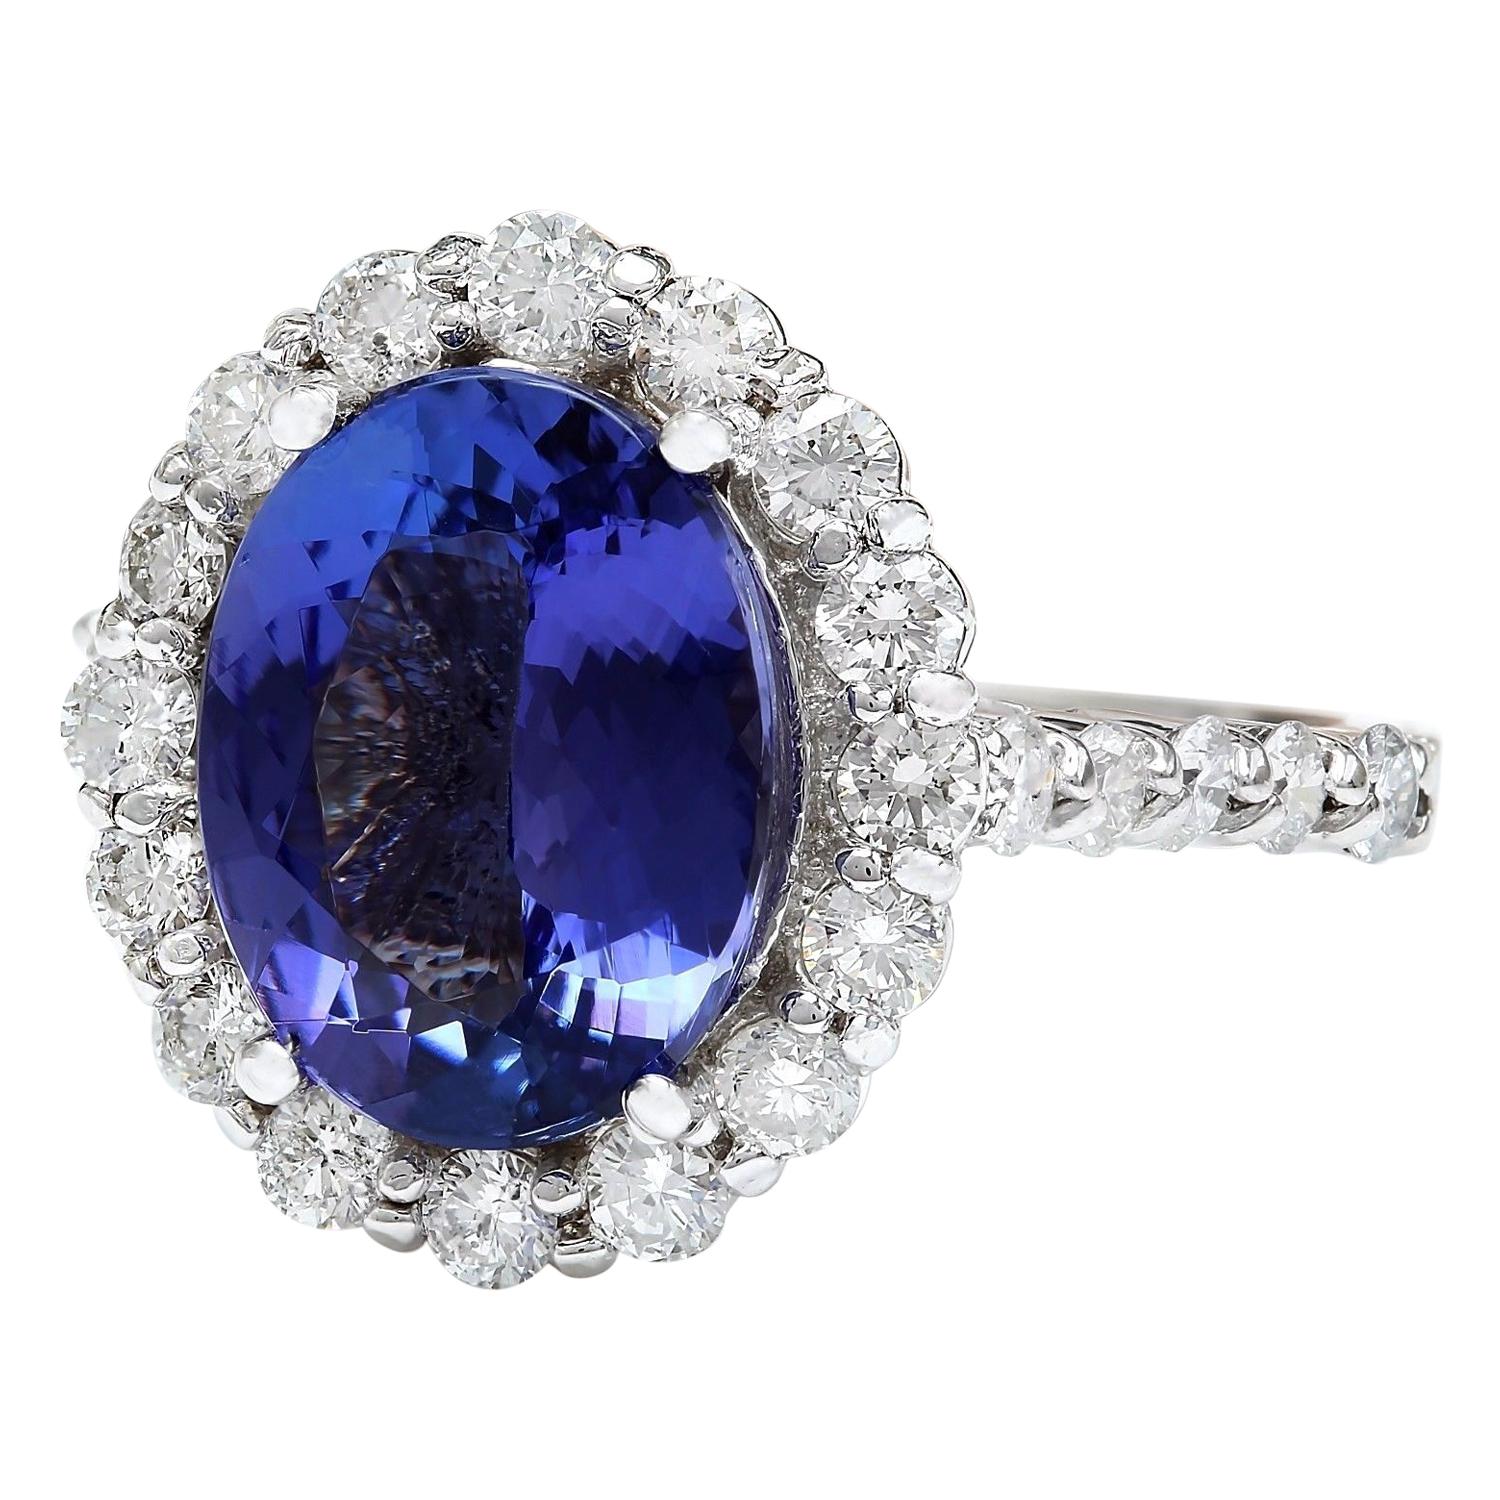 Indulge in elegance with our stunning 4.46 Carat Natural Tanzanite Ring, crafted in luxurious 14K White Gold. The centerpiece is a captivating oval-shaped Tanzanite, weighing 3.66 Carats and measuring 11.00x9.00 mm. Accompanying this mesmerizing gem